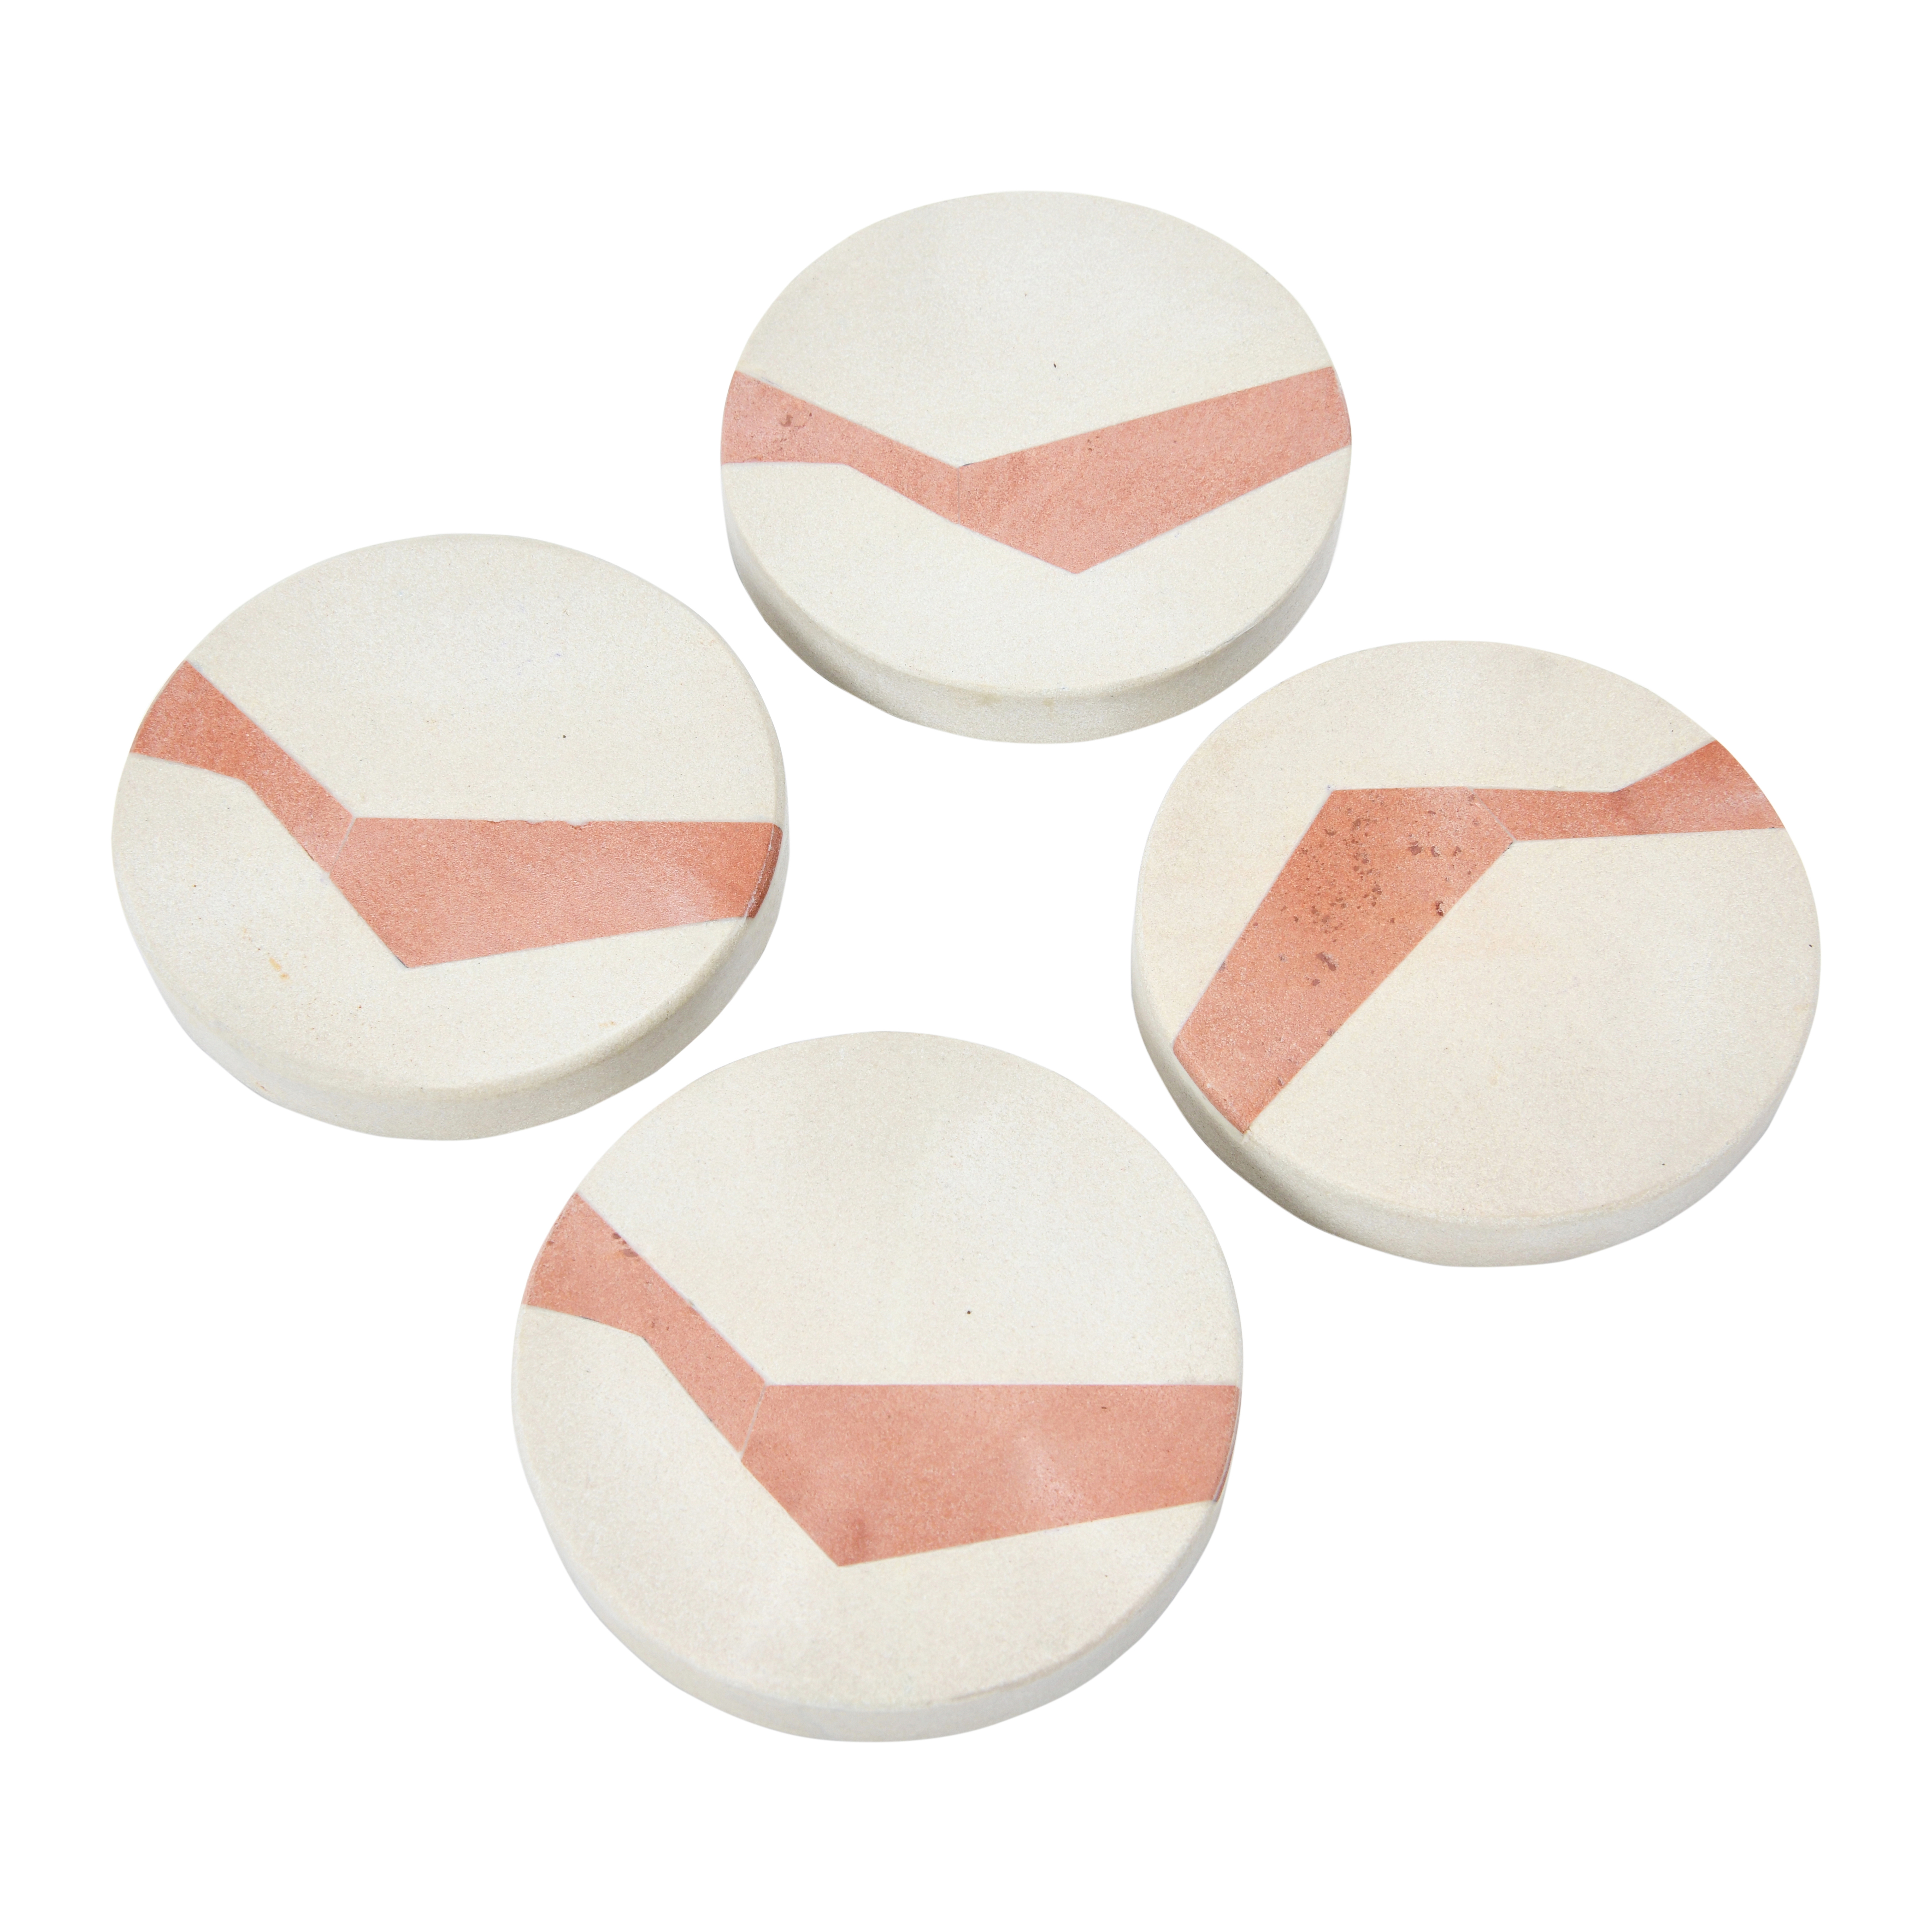 Round Sandstone Coasters with Abstract Design, Off-White/Terracotta, Set of 4 - Nomad Home